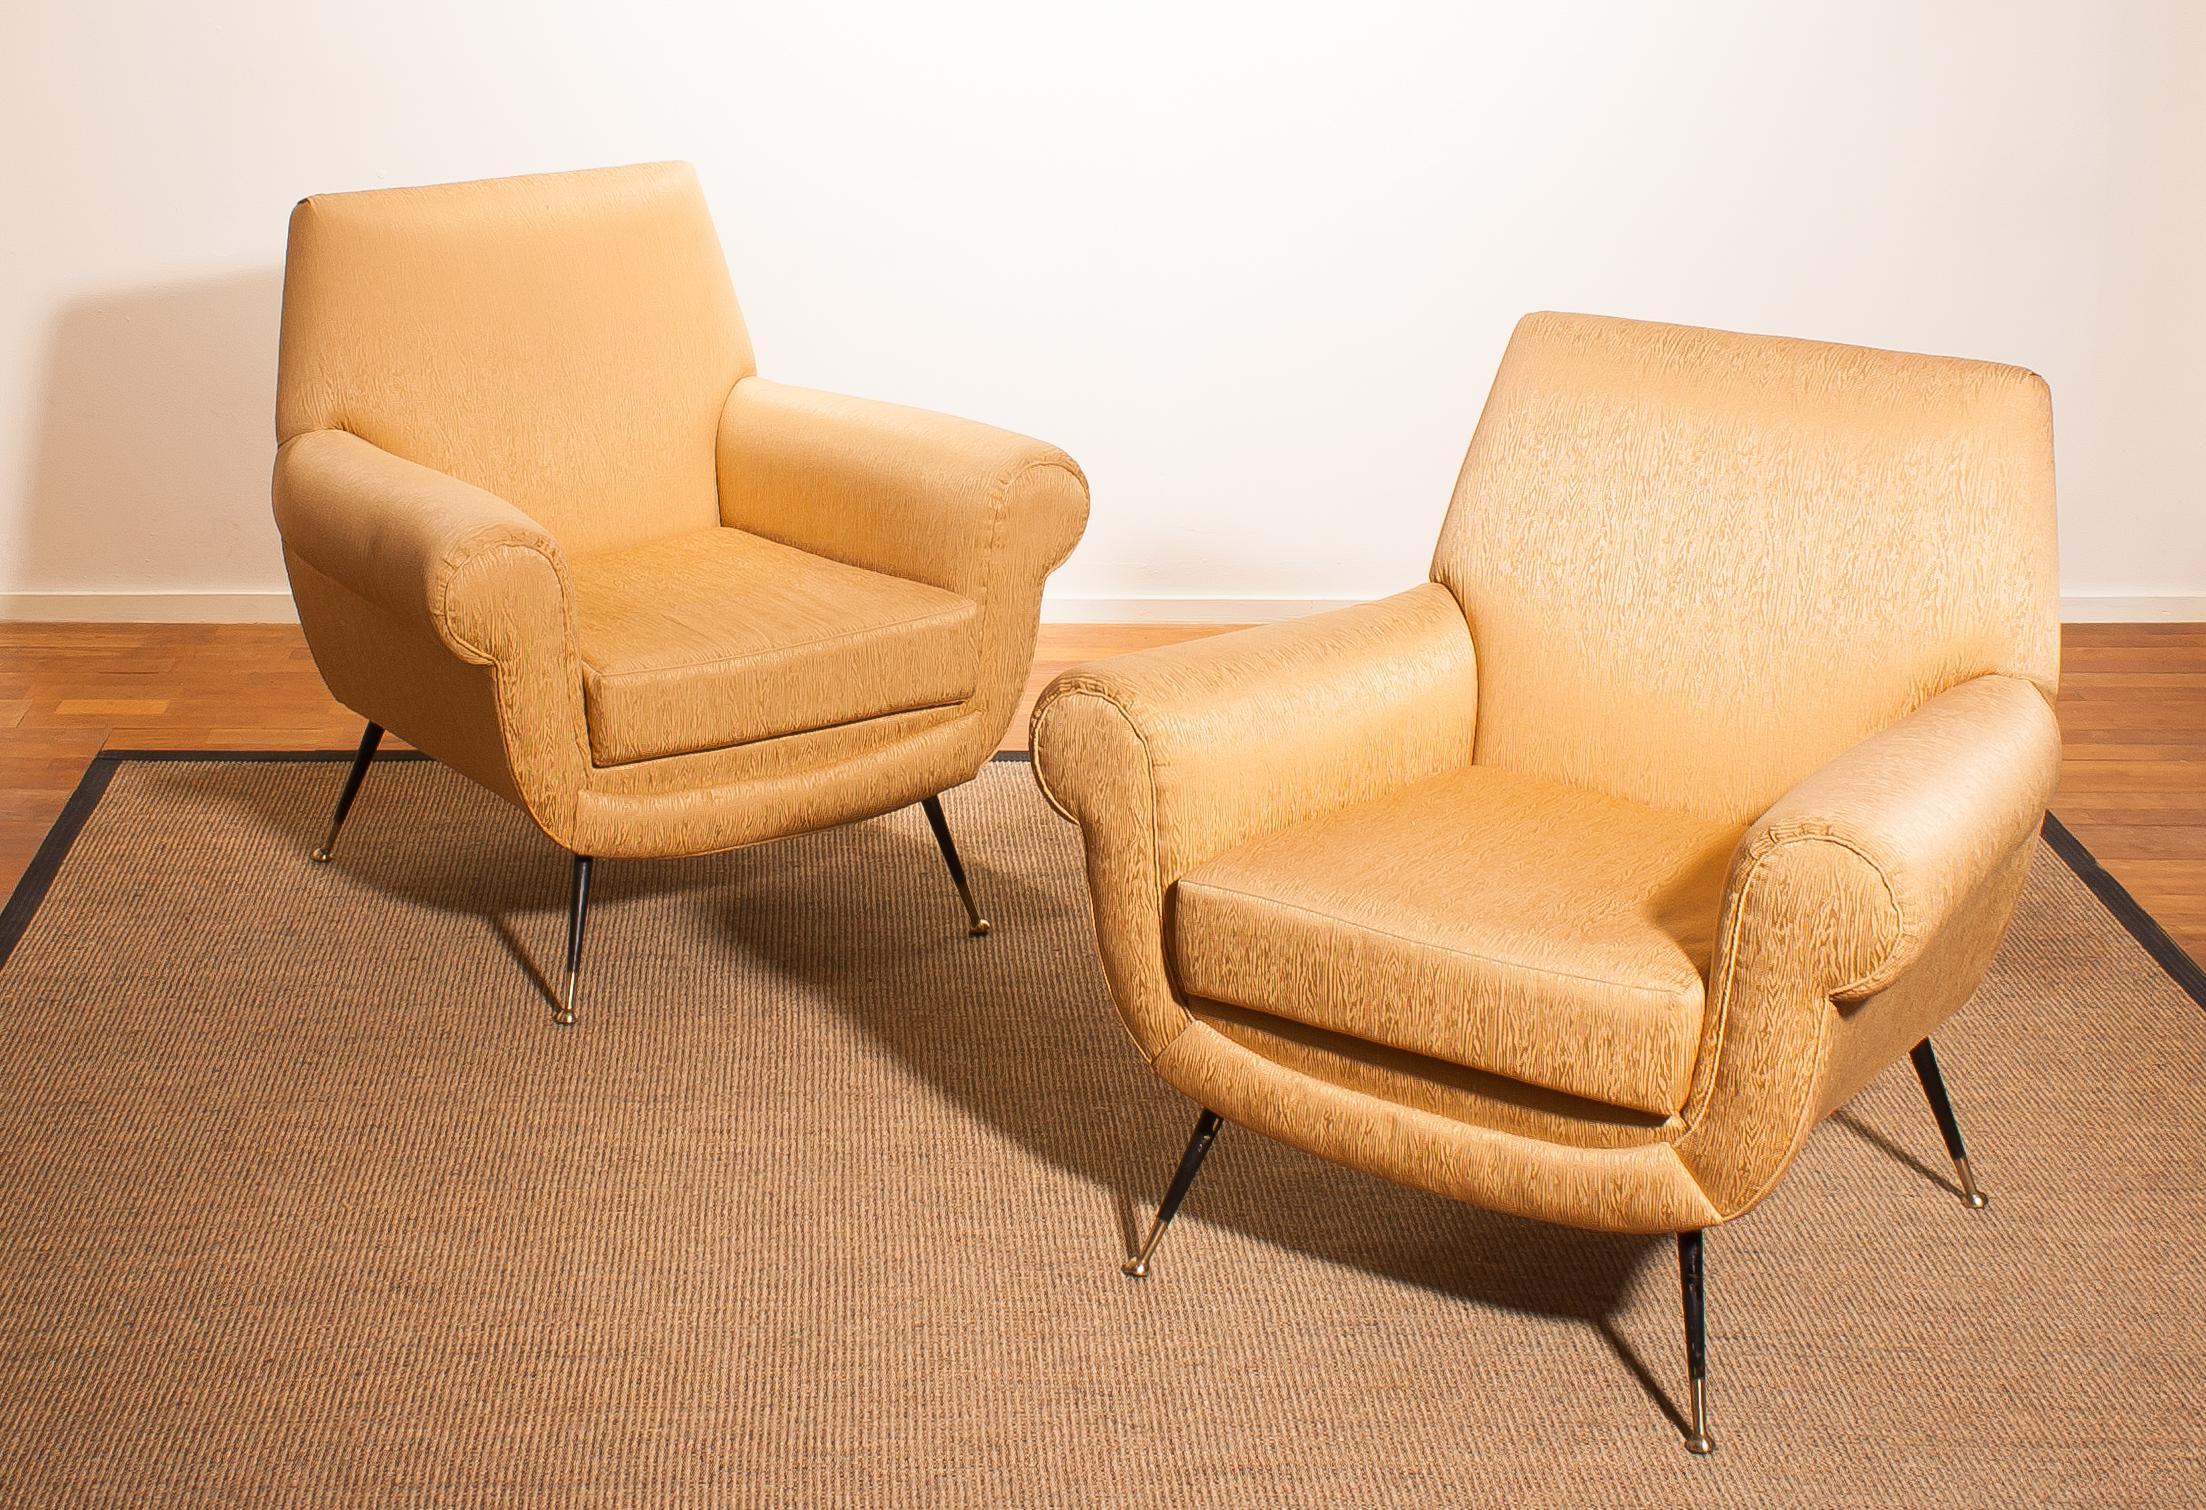 Beautiful and excellent pair of Italian midcentury lounge chairs of the 1950s. With the original brass stiletto legs and gold coloured jacquard fabric (later period), all in perfect condition and with an extremely comfortable seat.
Designed by Gigi